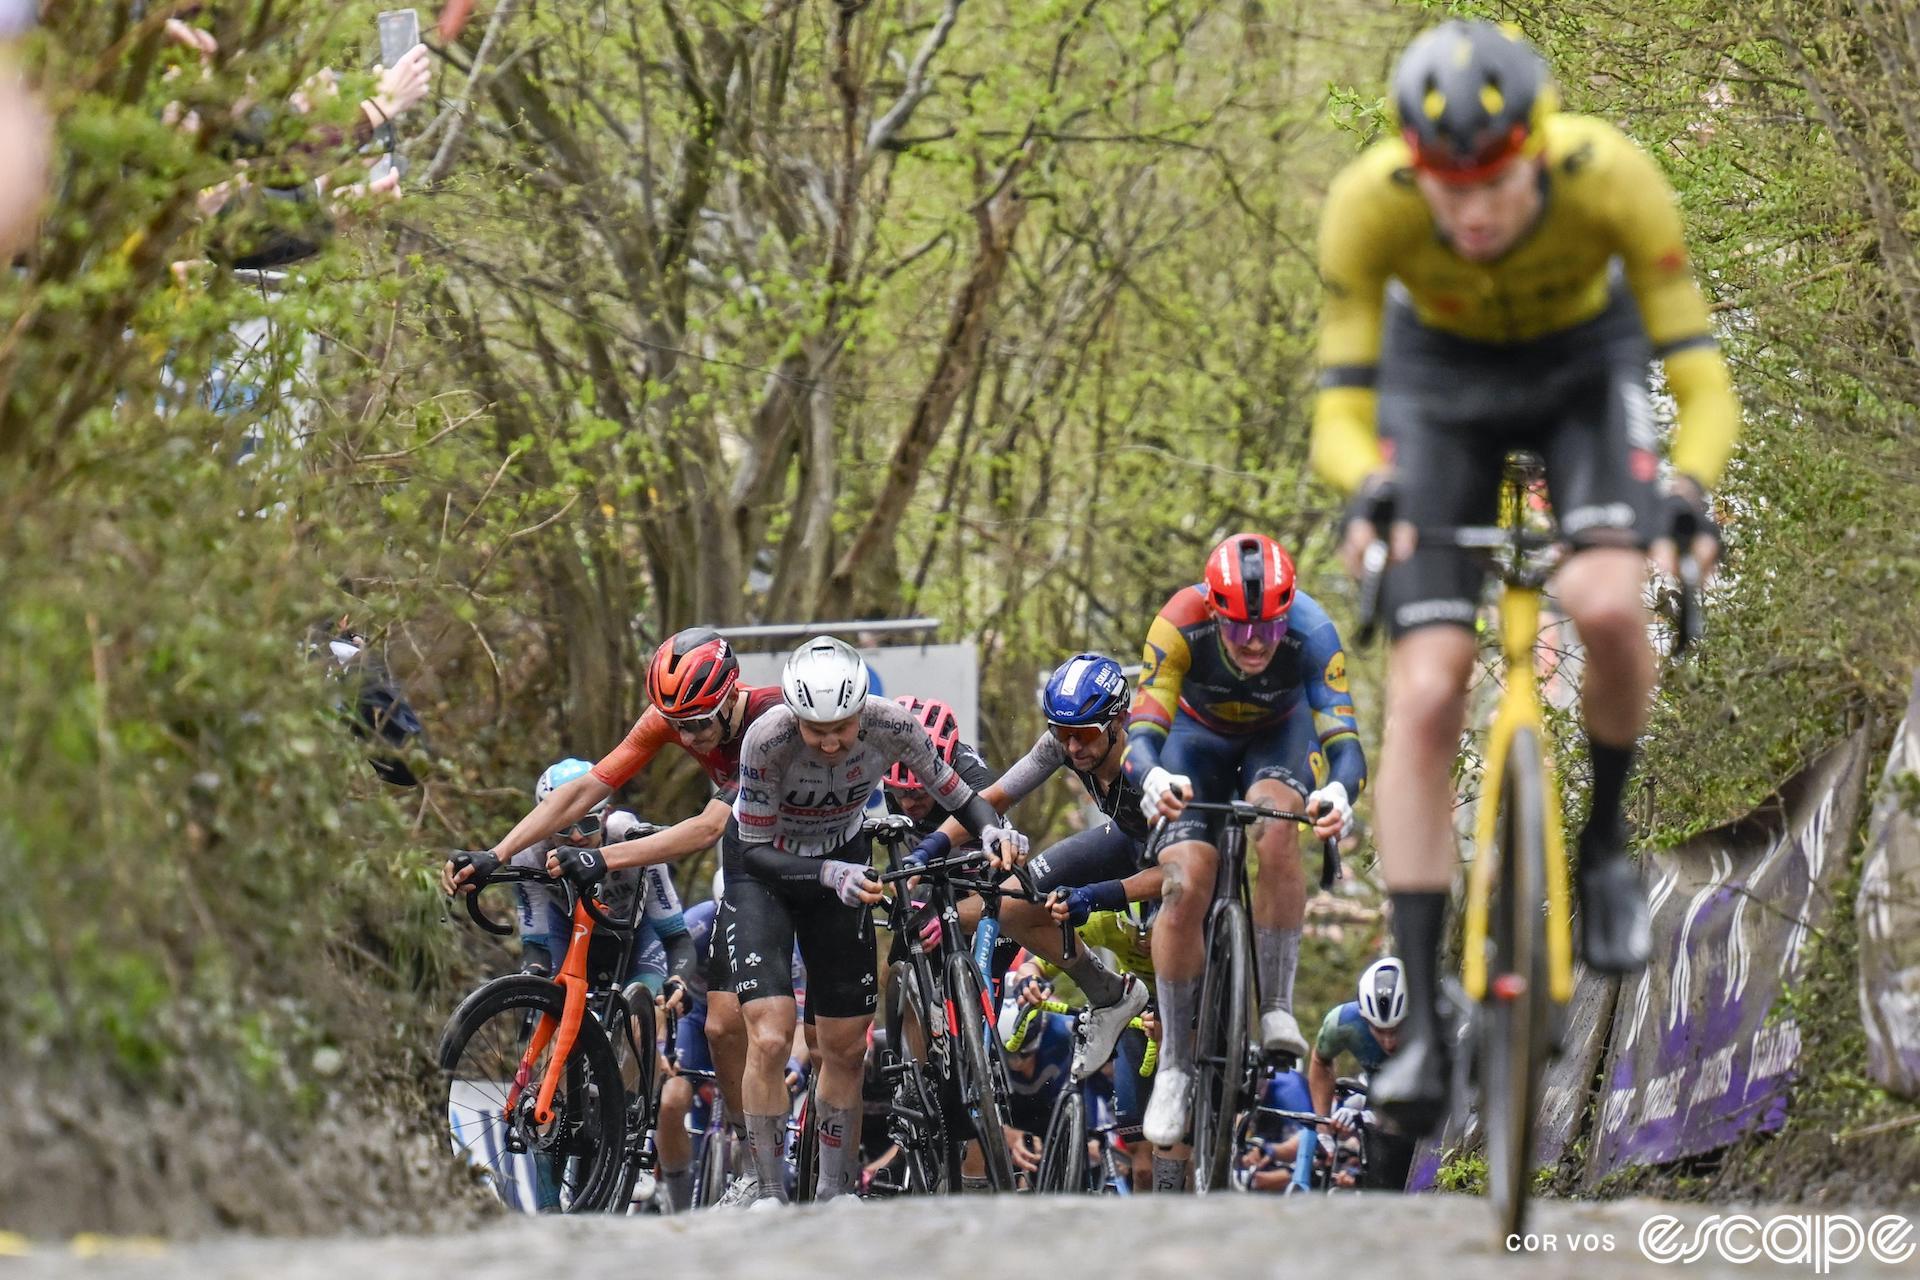 Left to right, Ben Turner, Tim Wellens, and Dylan Teuns unclip off their bikes on the steep, slippery Koppenberg just behind Mads Pedersen and Matteo Jorgenson.